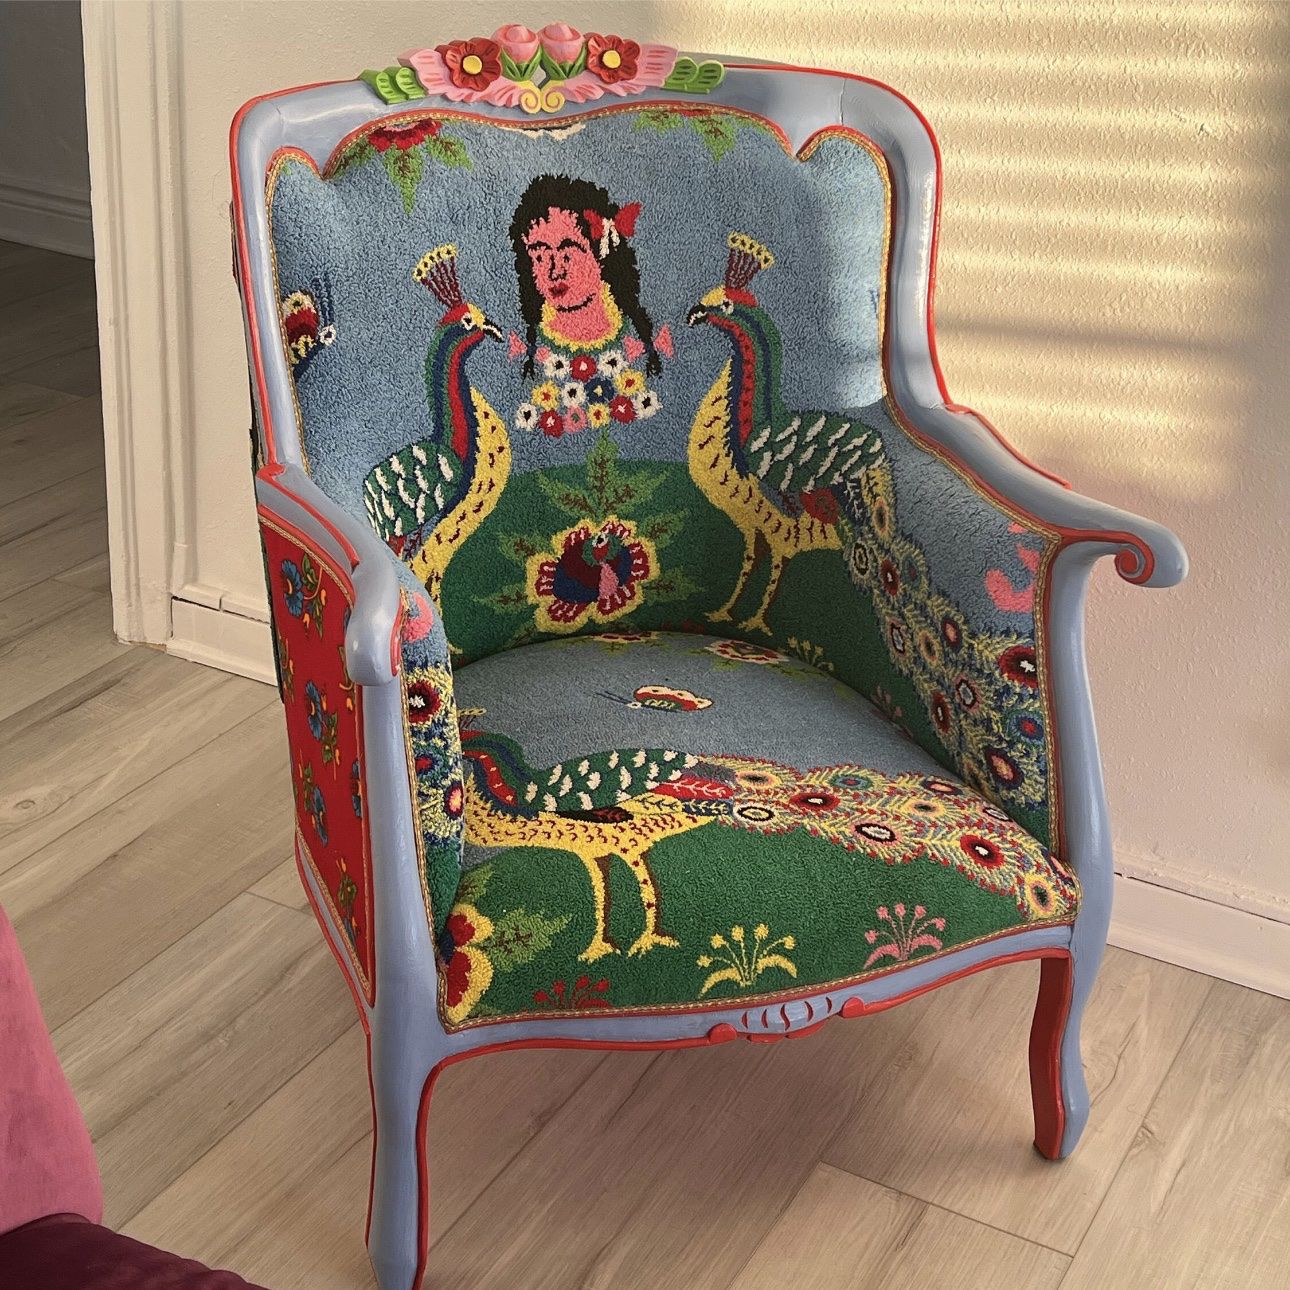 Bohemian Embroidery Armchair Peacocks and Woodwork, Magical Fairy tale Furniture Vintage Embroidery, Punch Needle Embroidery, Hand Painted